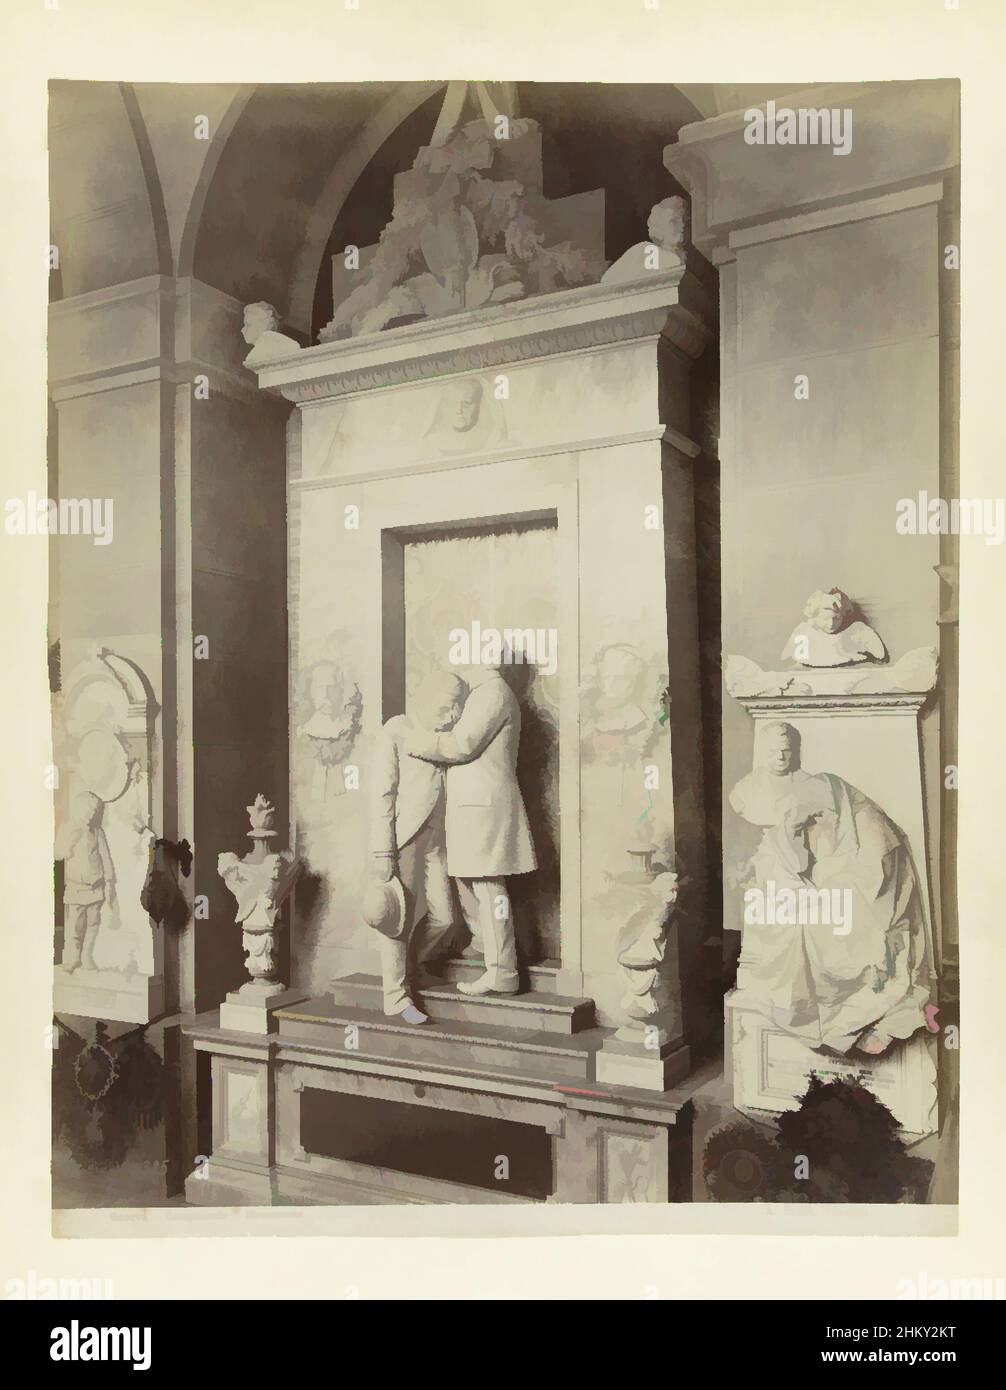 Art inspired by Tomb monument in marble topped with a statue of a man comforting another man3855. Genova Camposanto Monumento Picollo (Moreno) A. Noack, Genova., Alfredo Noack, Genua, c. 1881 - c. 1900, photographic support, albumen print, height 260 mm × width 207 mmheight 277 mm, Classic works modernized by Artotop with a splash of modernity. Shapes, color and value, eye-catching visual impact on art. Emotions through freedom of artworks in a contemporary way. A timeless message pursuing a wildly creative new direction. Artists turning to the digital medium and creating the Artotop NFT Stock Photo